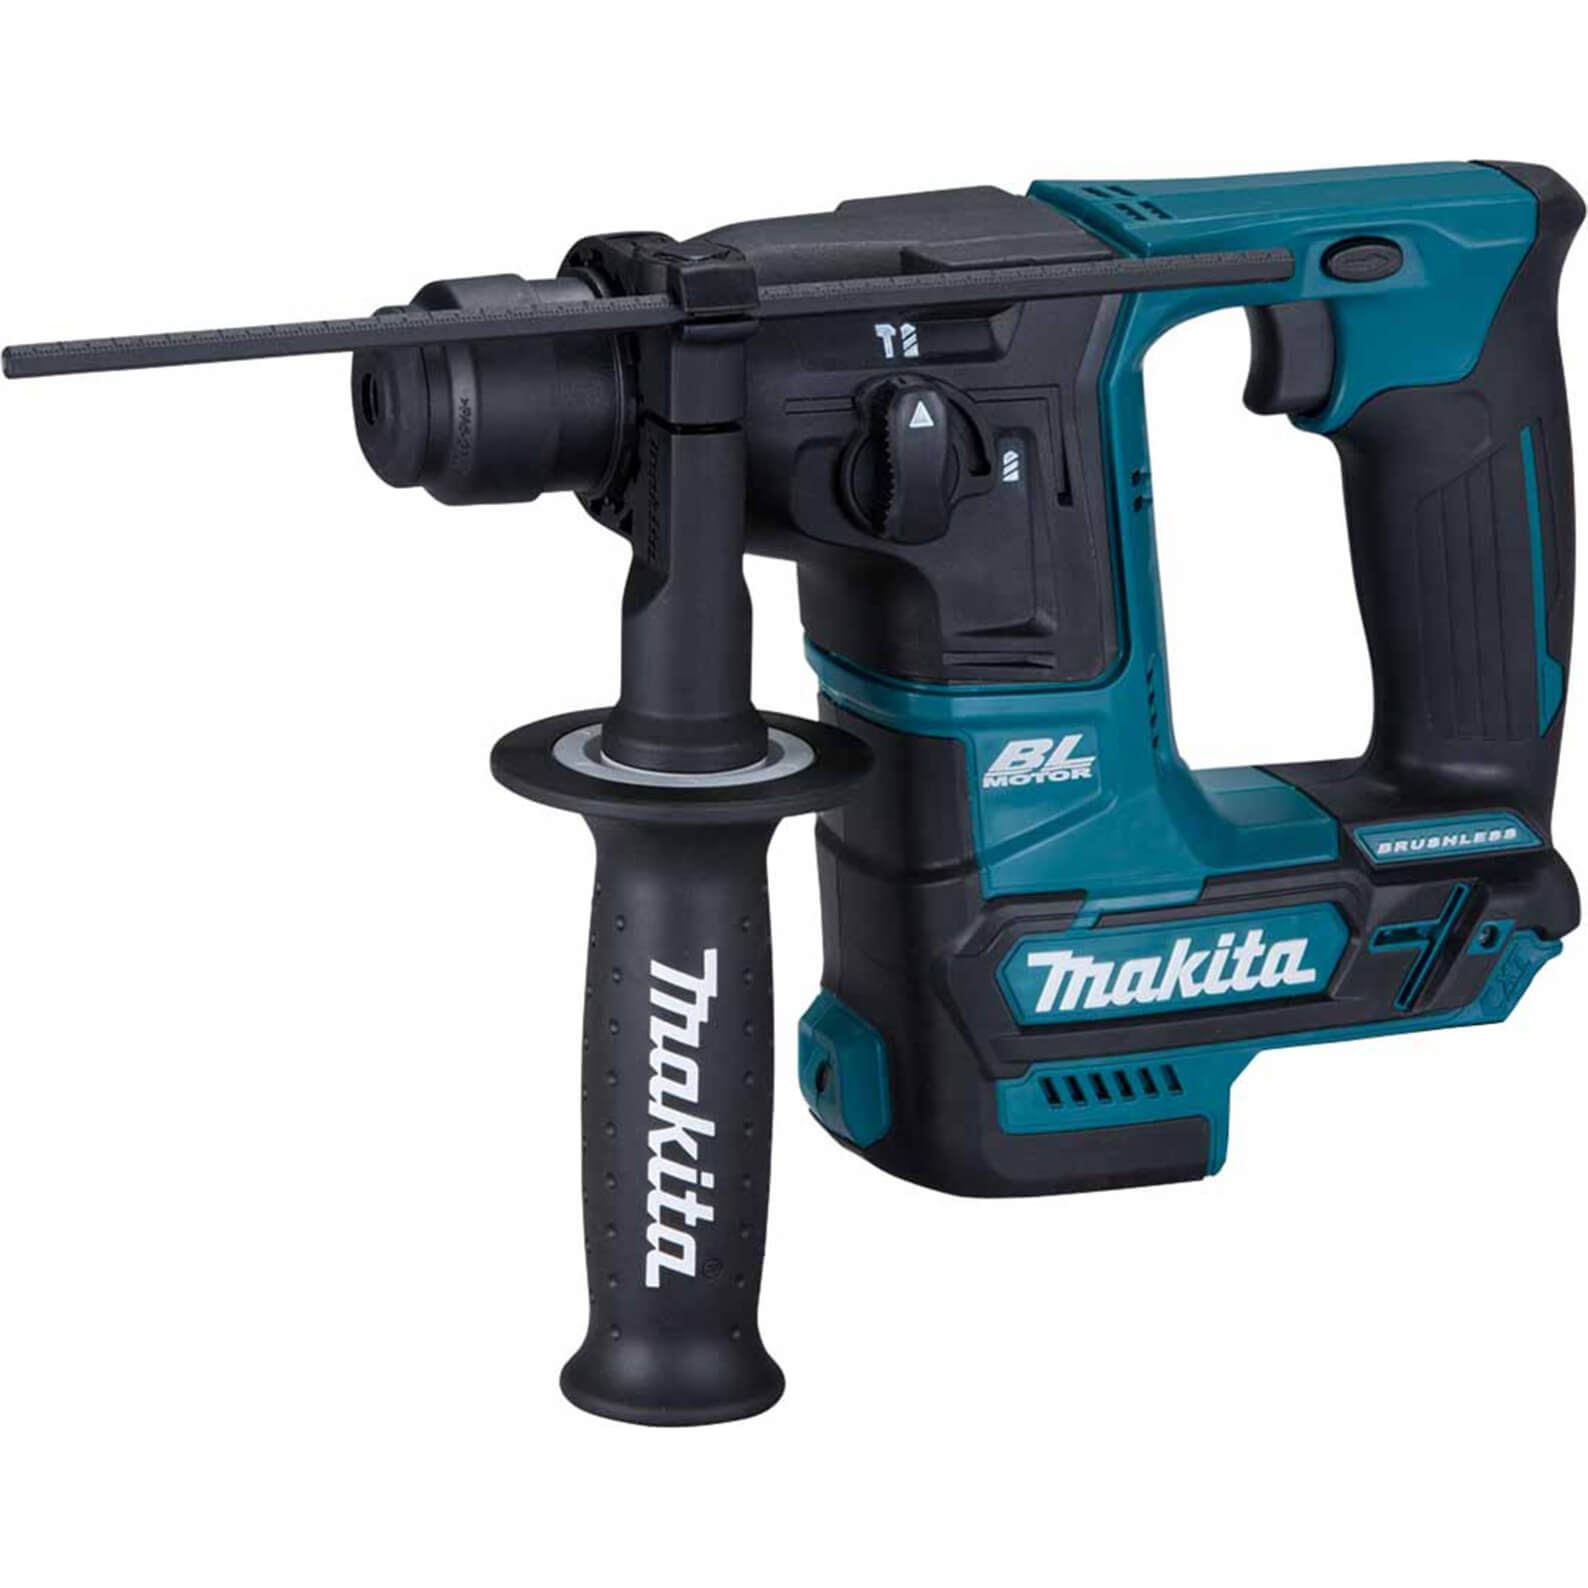 Image of Makita HR166D 12v Max CXT Cordless Brushless SDS Plus Rotary Hammer Drill No Batteries No Charger No Case